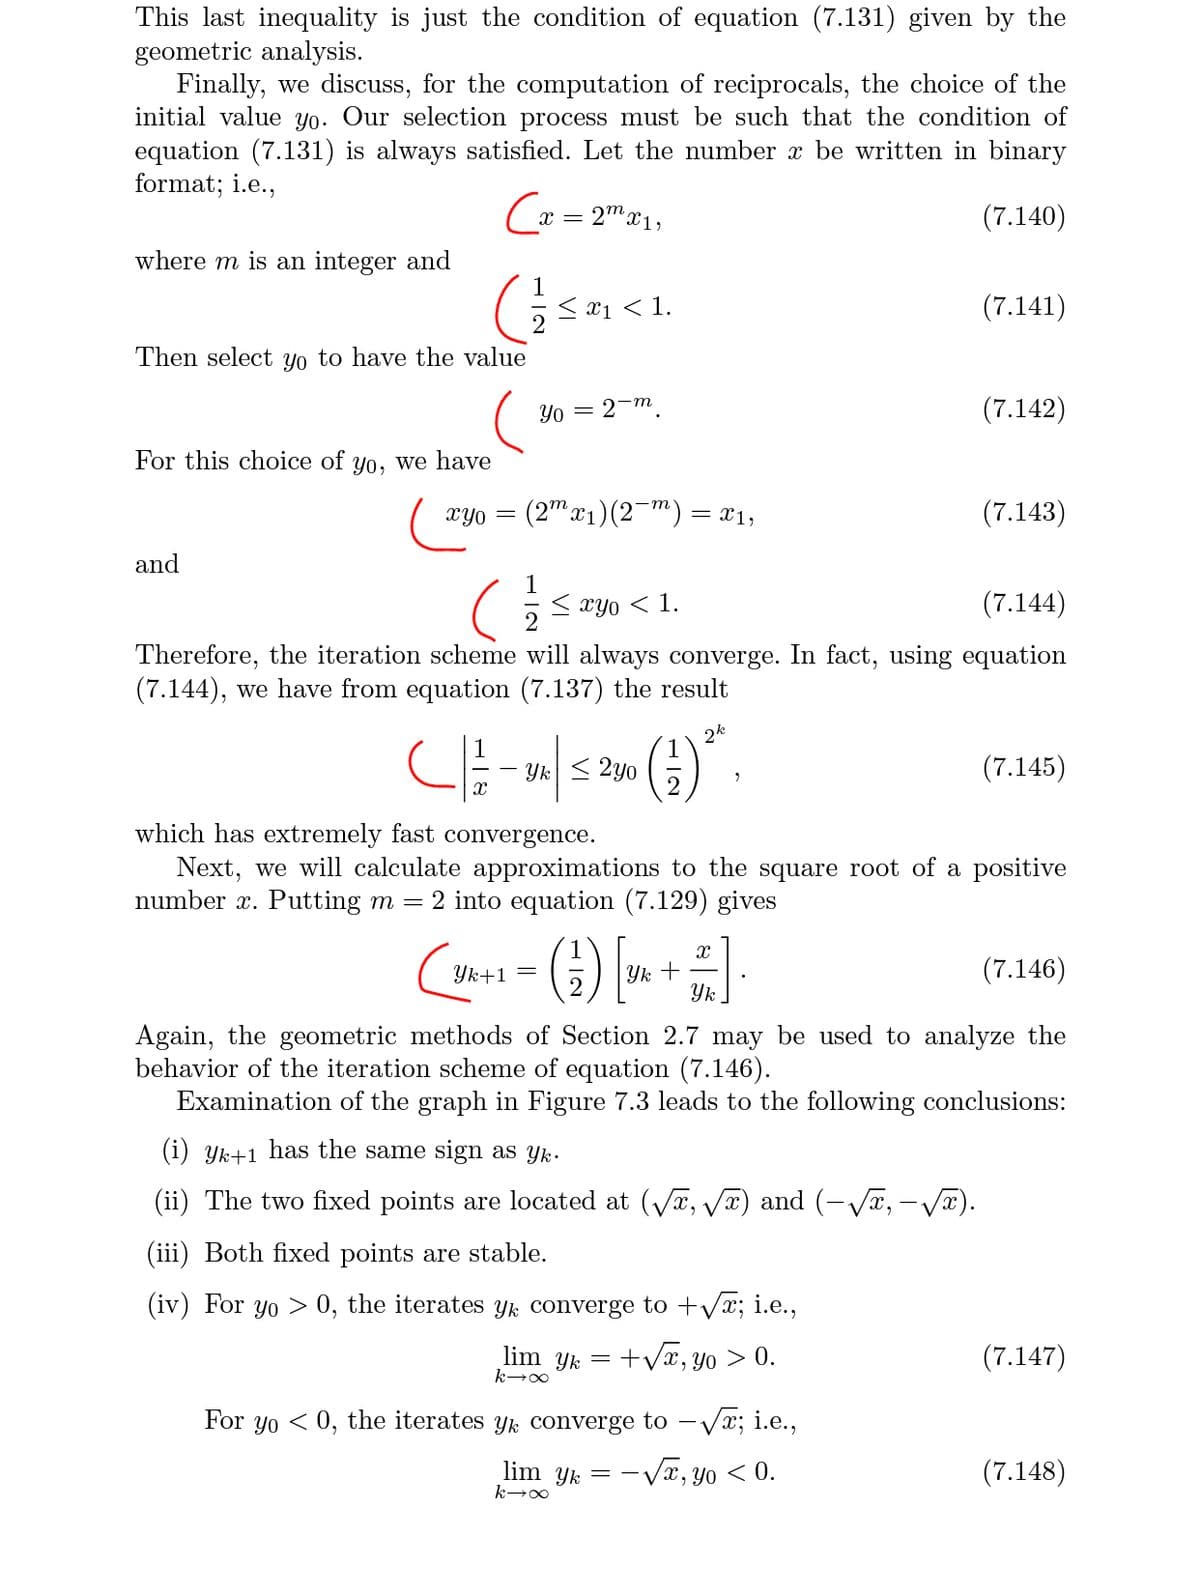 This last inequality is just the condition of equation (7.131) given by the
geometric analysis.
Finally, we discuss, for the computation of reciprocals, the choice of the
initial value yo. Our selection process must be such that the condition of
equation (7.131) is always satisfied. Let the number x be written in binary
format; i.e.,
Cx = 2" x1,
(7.140)
where m is an integer and
< x1 < 1.
(7.141)
Then select yo to have the value
Yo = 2-m
(7.142)
For this choice of yo, we have
(2" x1)(2-m) = X1,
(7.143)
XYO =
and
< xyo < 1.
(7.144)
Therefore, the iteration scheme will always converge. In fact, using equation
(7.144), we have from equation (7.137) the result
2k
Yk < 2y0
(7.145)
which has extremely fast convergence.
Next, we will calculate approximations to the square root of a positive
number x. Putting m = 2 into equation (7.129) gives
() ►
Yk +
Yk
(7.146)
Yk+1 =
Again, the geometric methods of Section 2.7 may be used to analyze the
behavior of the iteration scheme of equation (7.146).
Examination of the graph in Figure 7.3 leads to the following conclusions:
(i) Yk+1 has the same sign as yk.
(ii) The two fixed points are located at (Va, V) and (-Va, - V®).
(iii) Both fixed points are stable.
(iv) For yo > 0, the iterates yk converge to +Vx; i.e.,
lim yk =
+Vx, yo > 0.
(7.147)
For yo < 0, the iterates yk converge to – Vx; i.e.,
lim yk =
-Væ, yo < 0.
(7.148)
